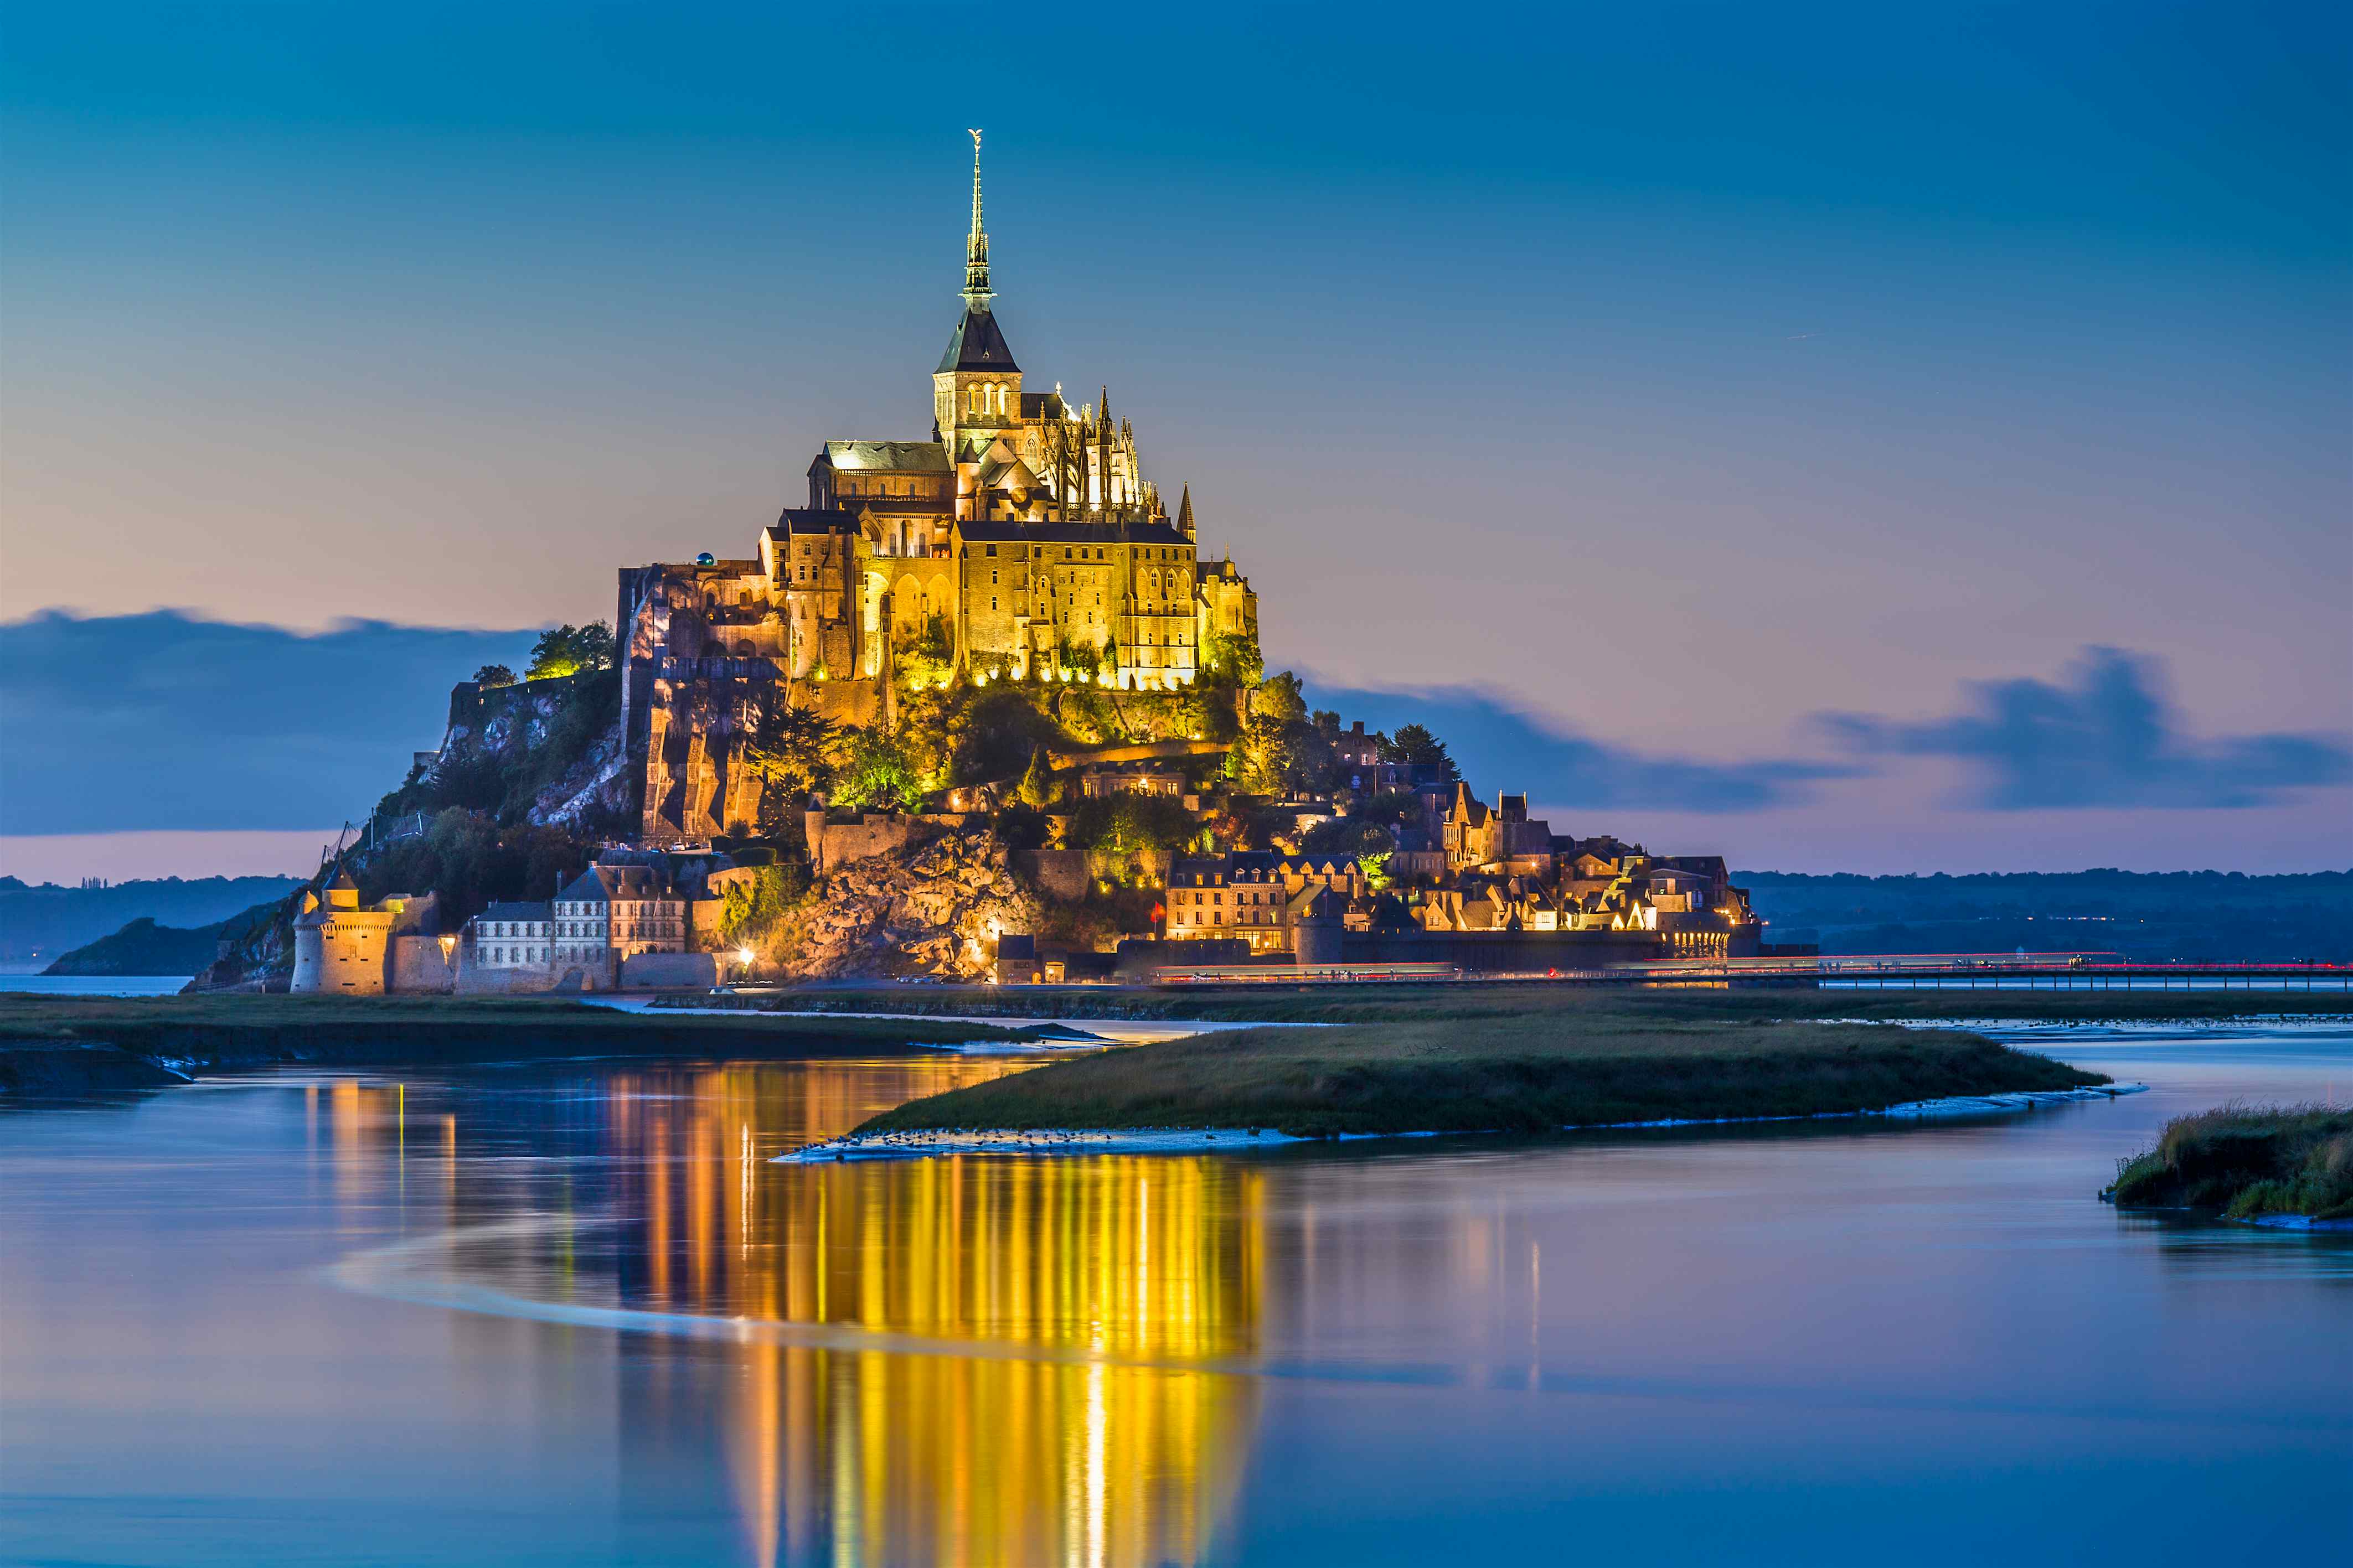 france places to visit in march